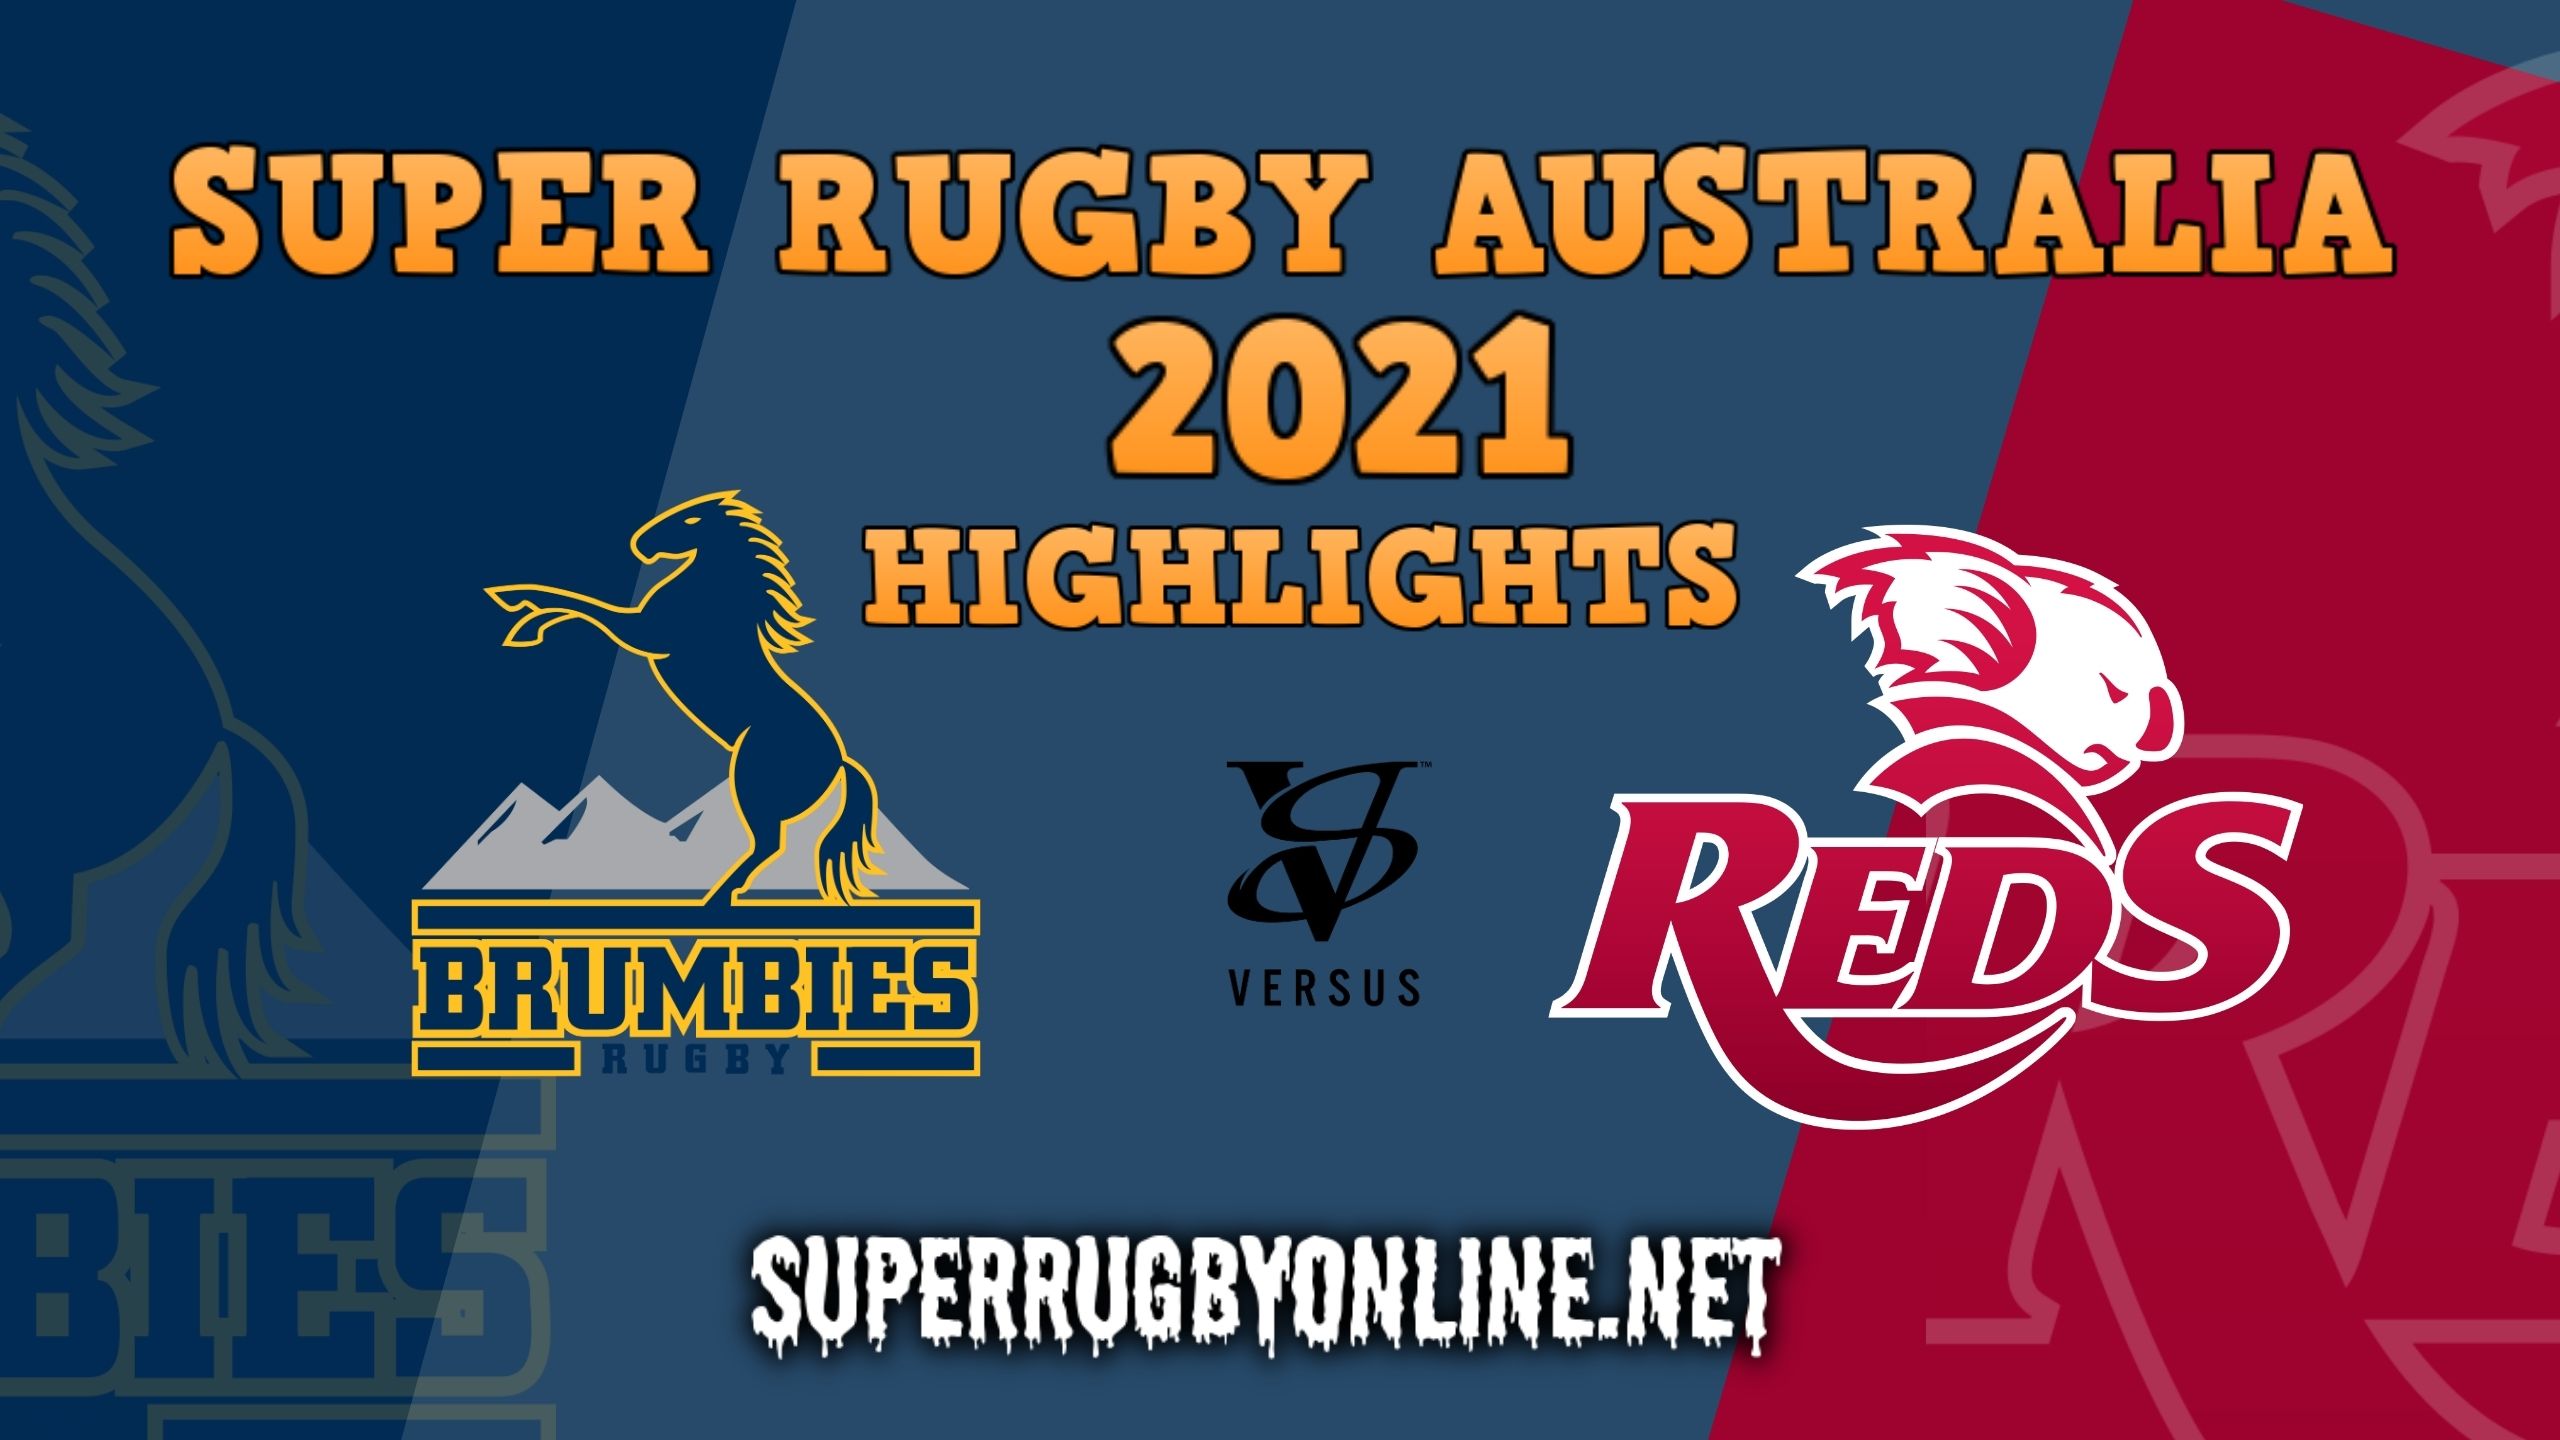 Brumbies Vs Reds Rd 4 Highlights 2021 Rugby Au